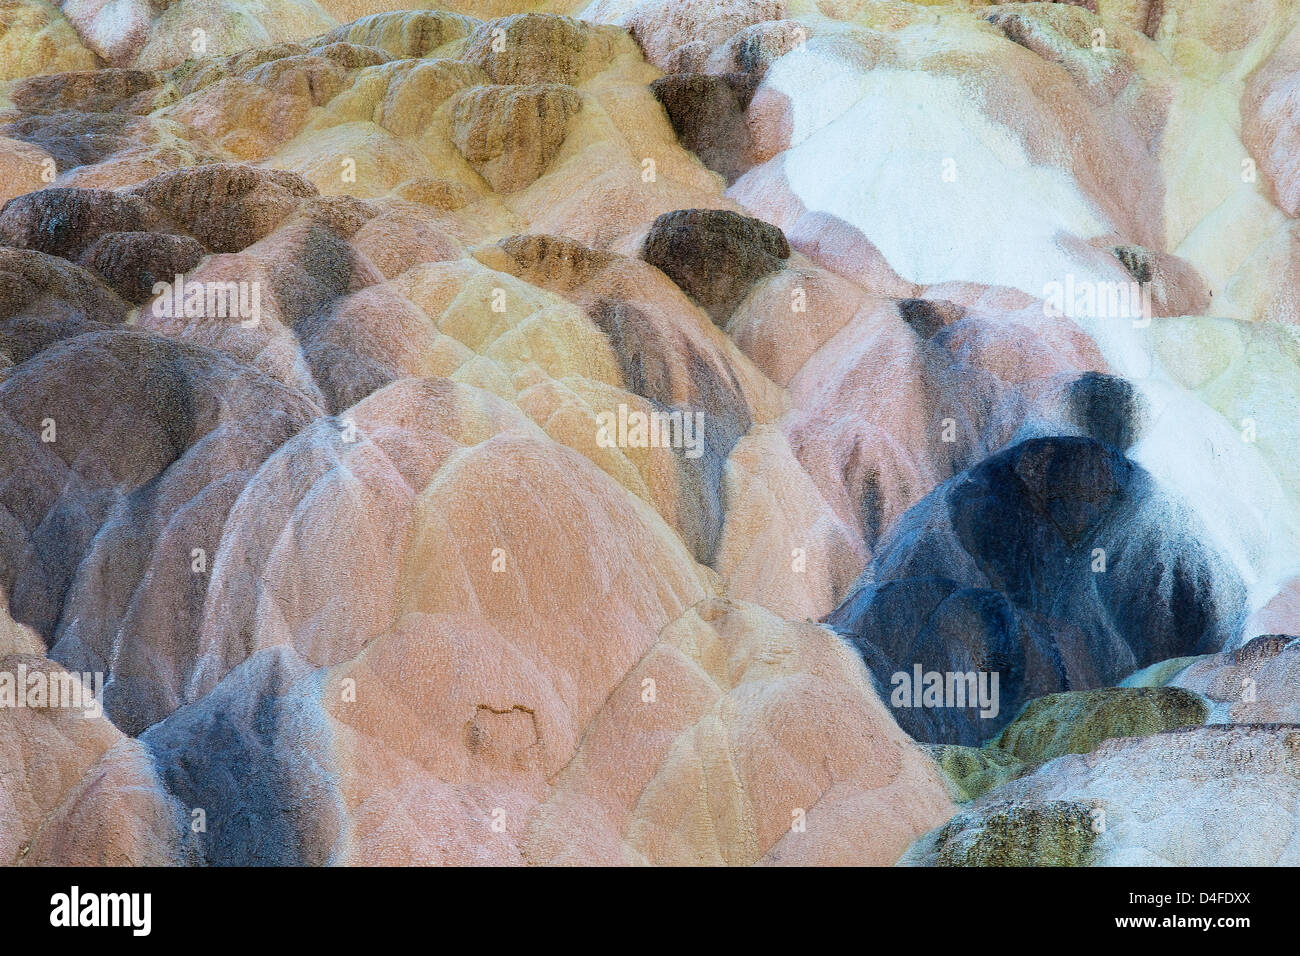 Rock formations in hot spring Stock Photo